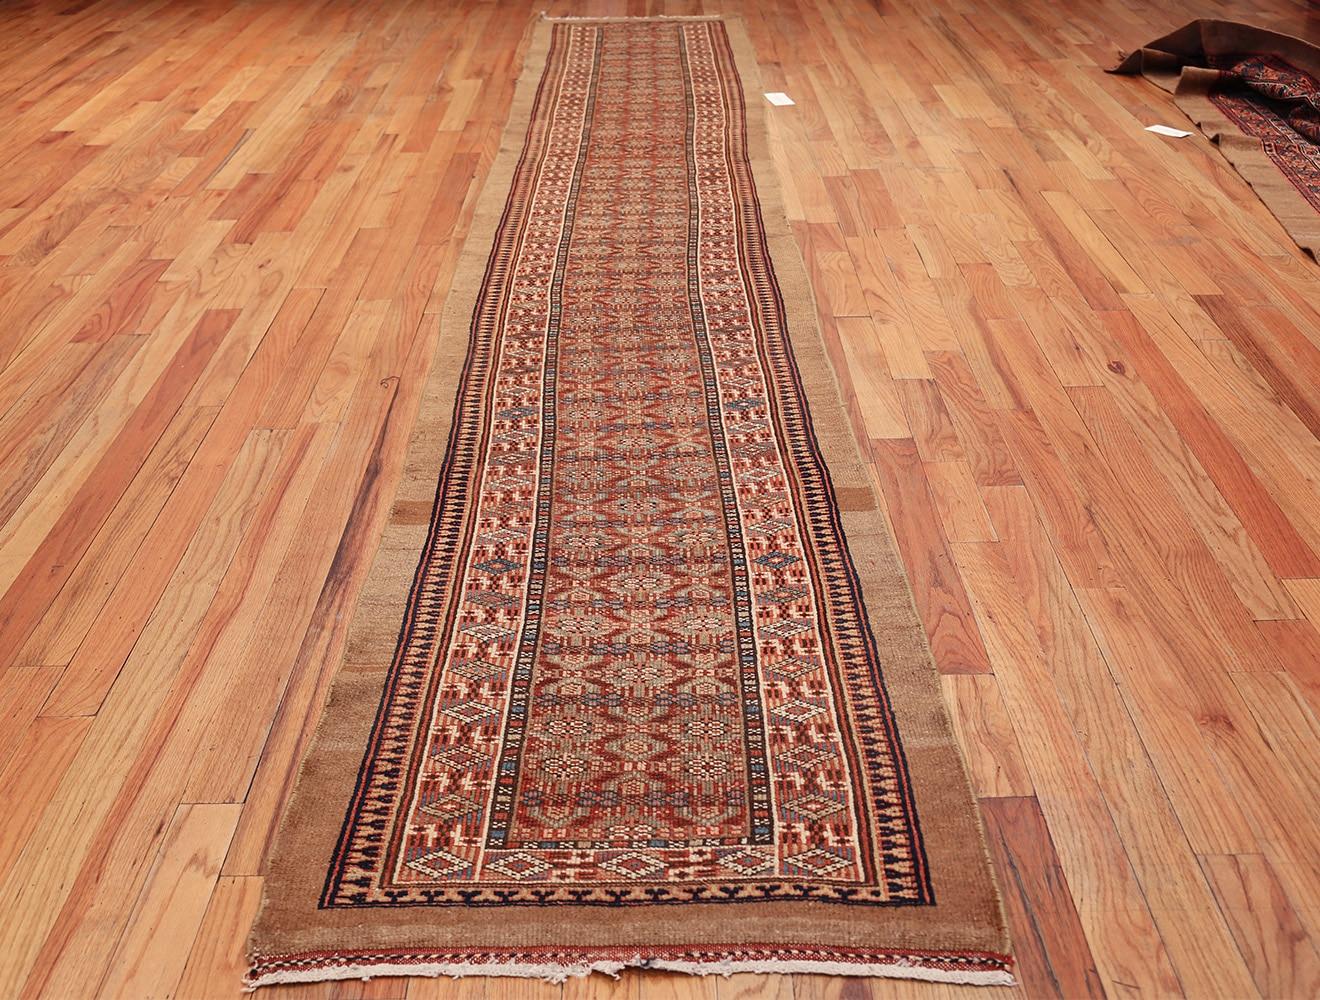 Tribal Long and Narrow Antique Persian Serab Runner Rug. Size: 2 ft 8 in x 16 ft 2